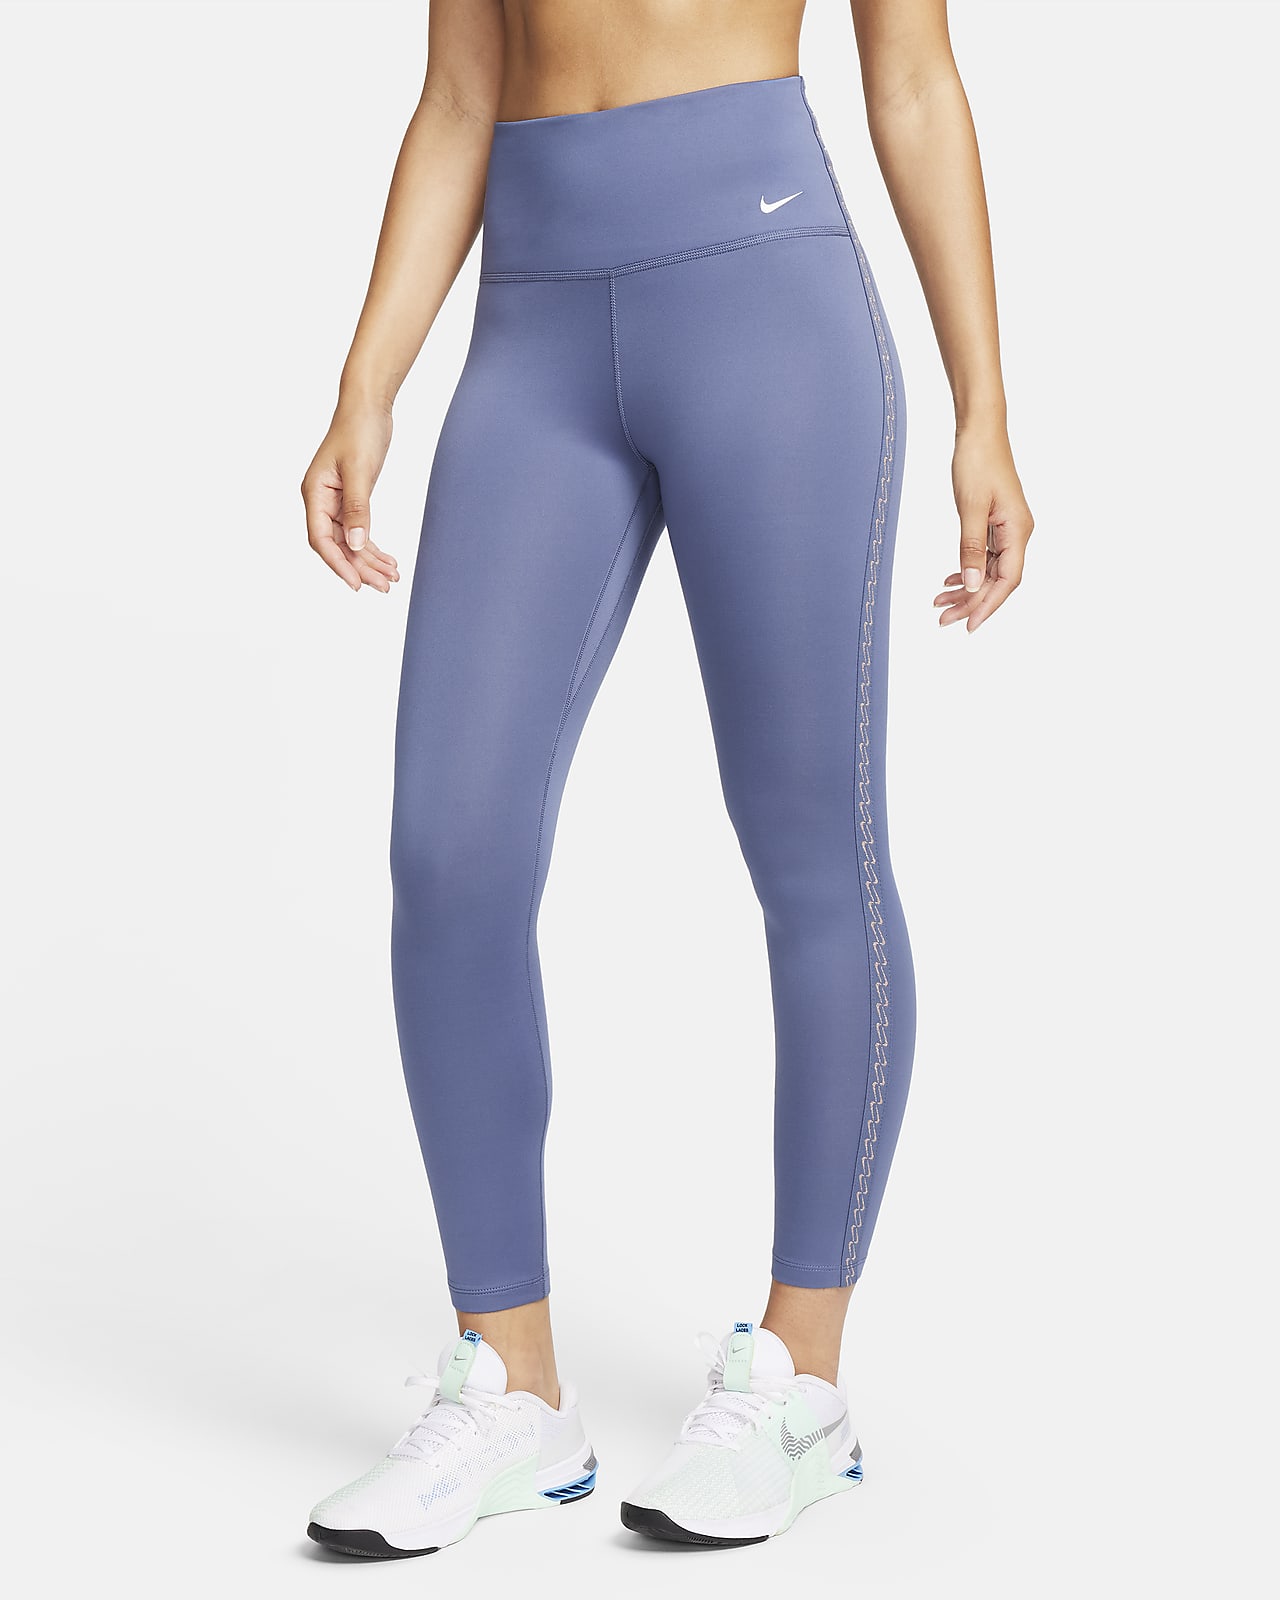 Legging 7/8 taille haute Therma-FIT Nike One pour femme. Nike CA